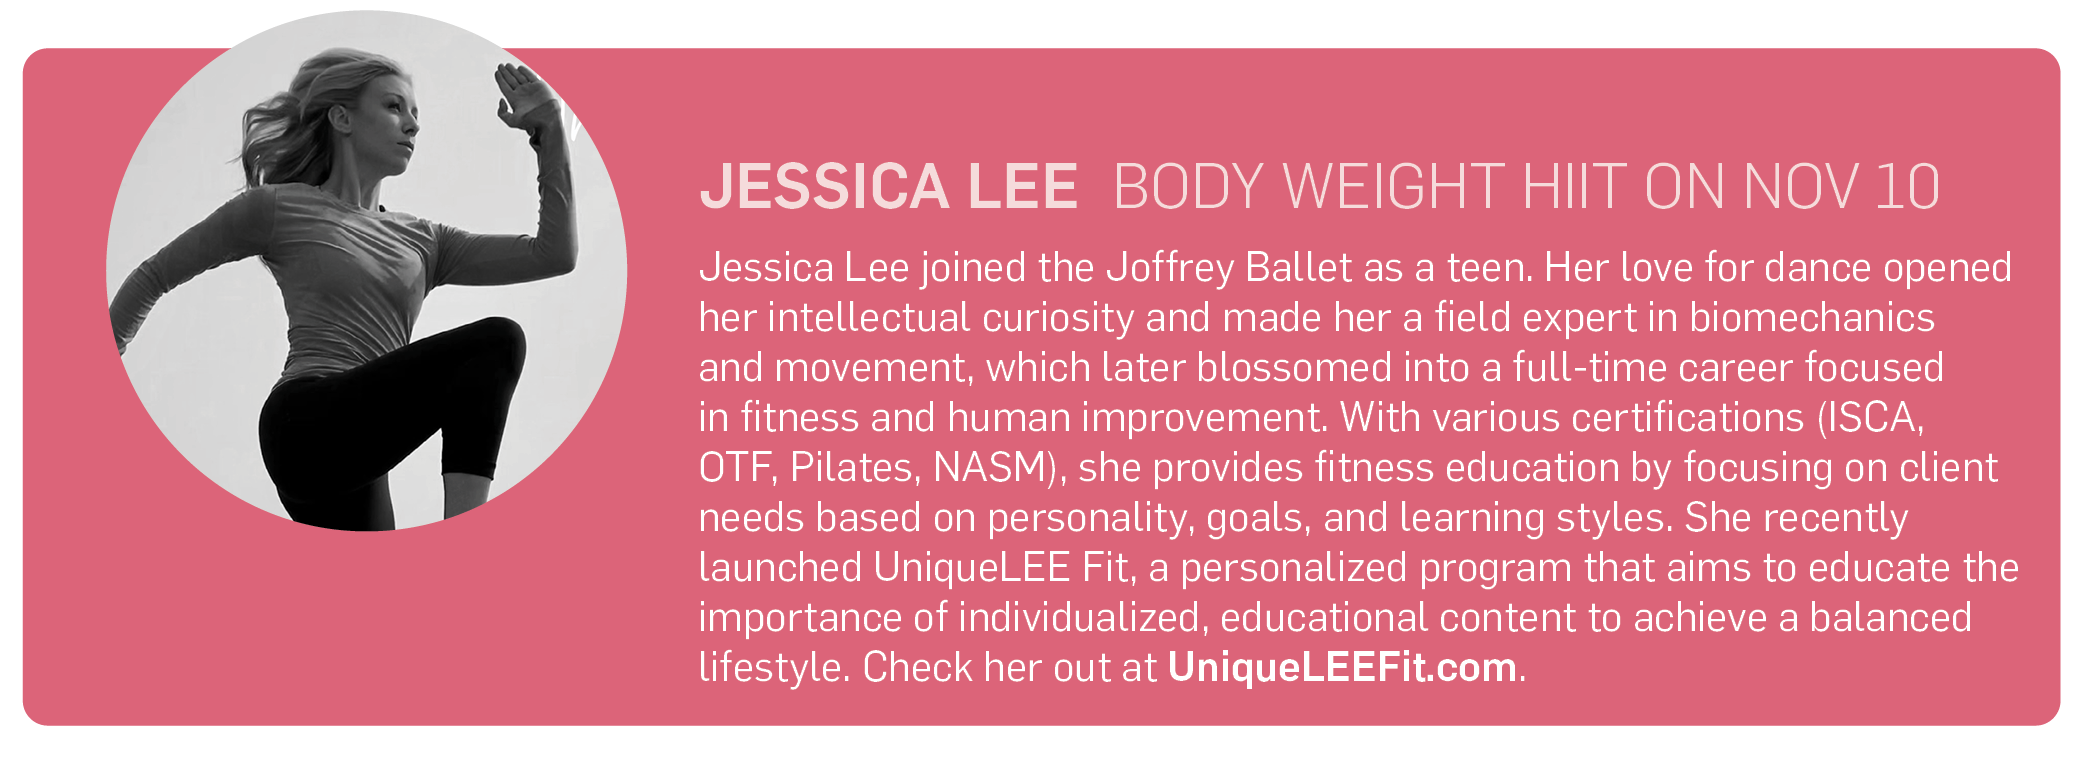 Jessica Lee, Body Weight HIIT